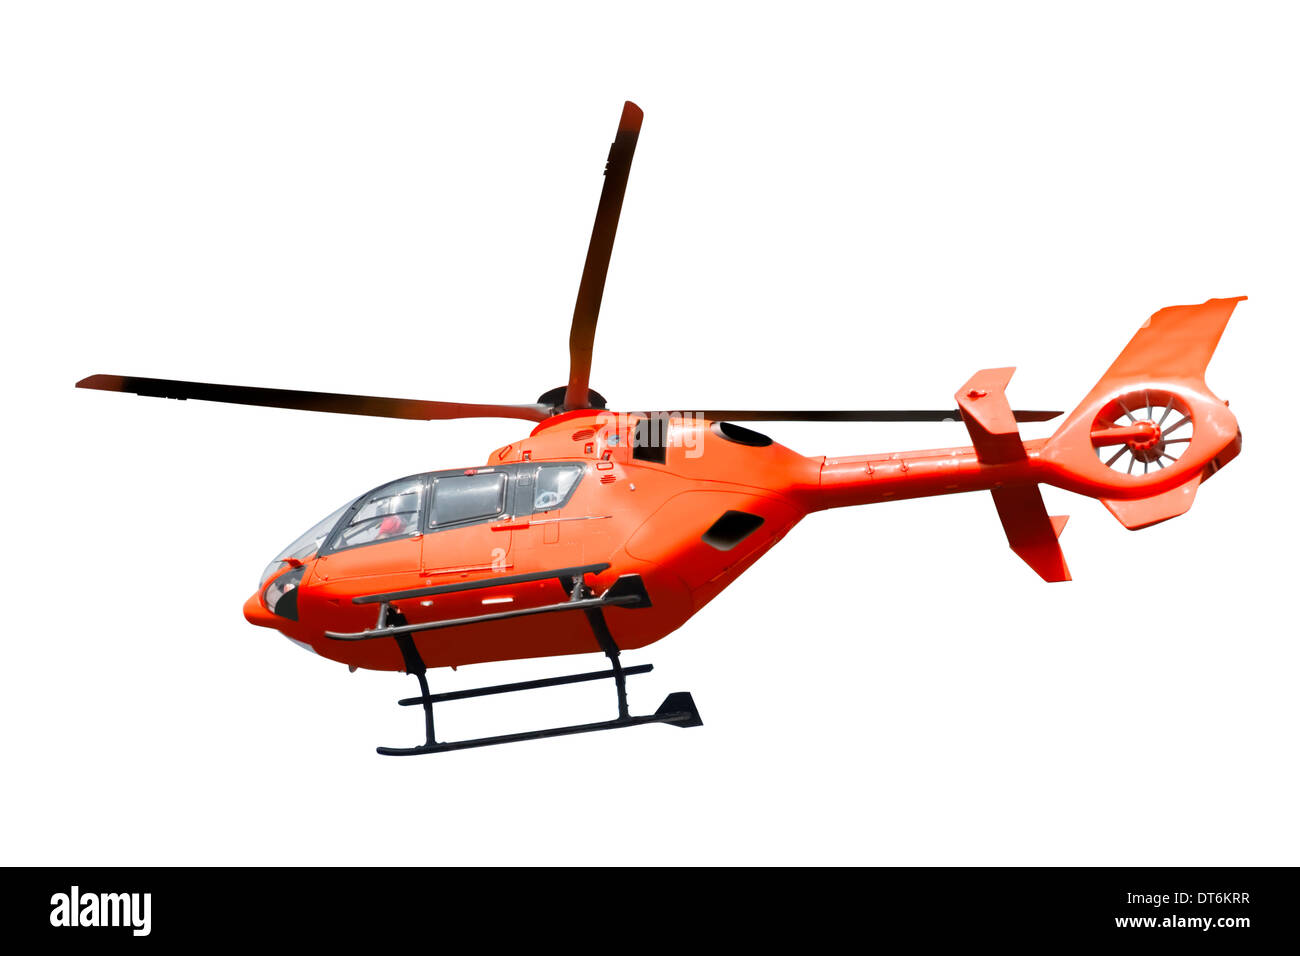 Red helicopter isolated on white background Stock Photo